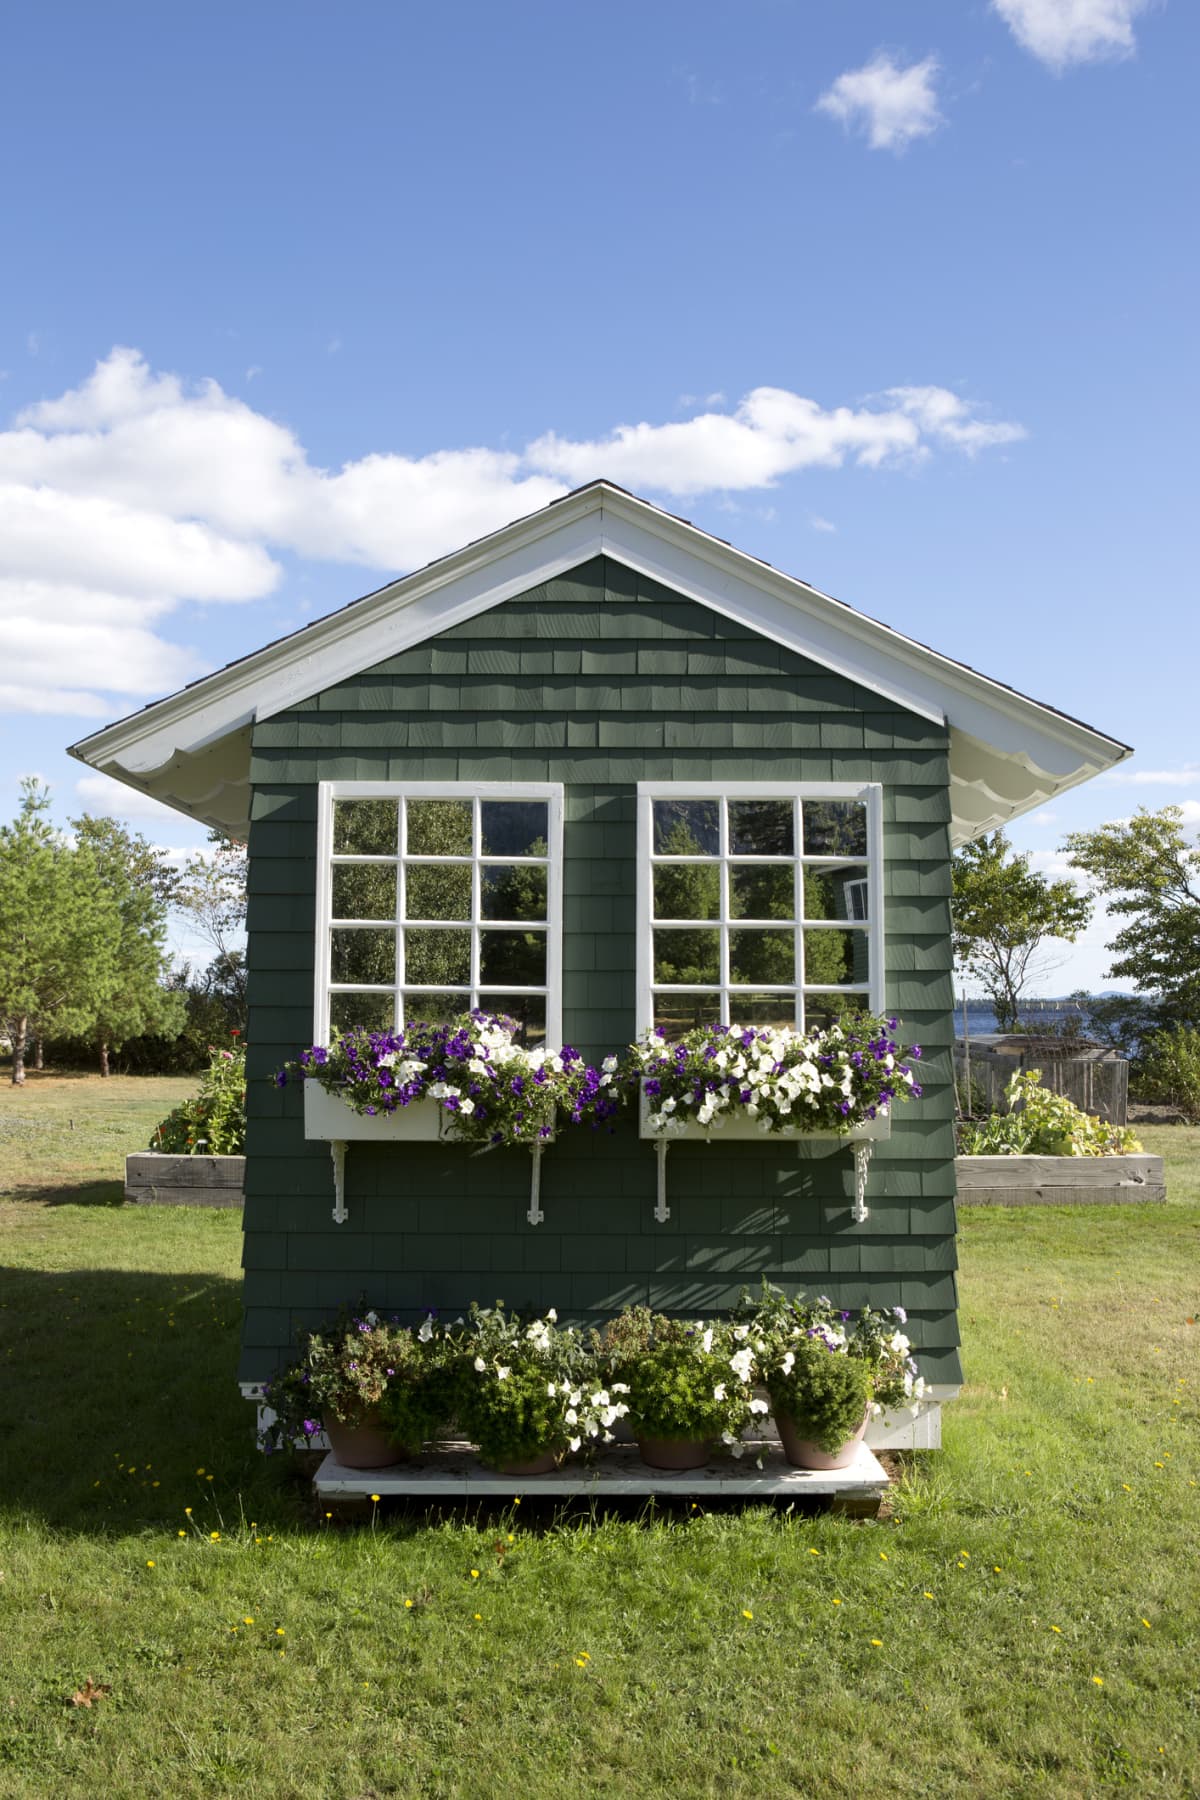 Cute shed with windows and flower boxes against a perfect blue sky with a few puffy clouds